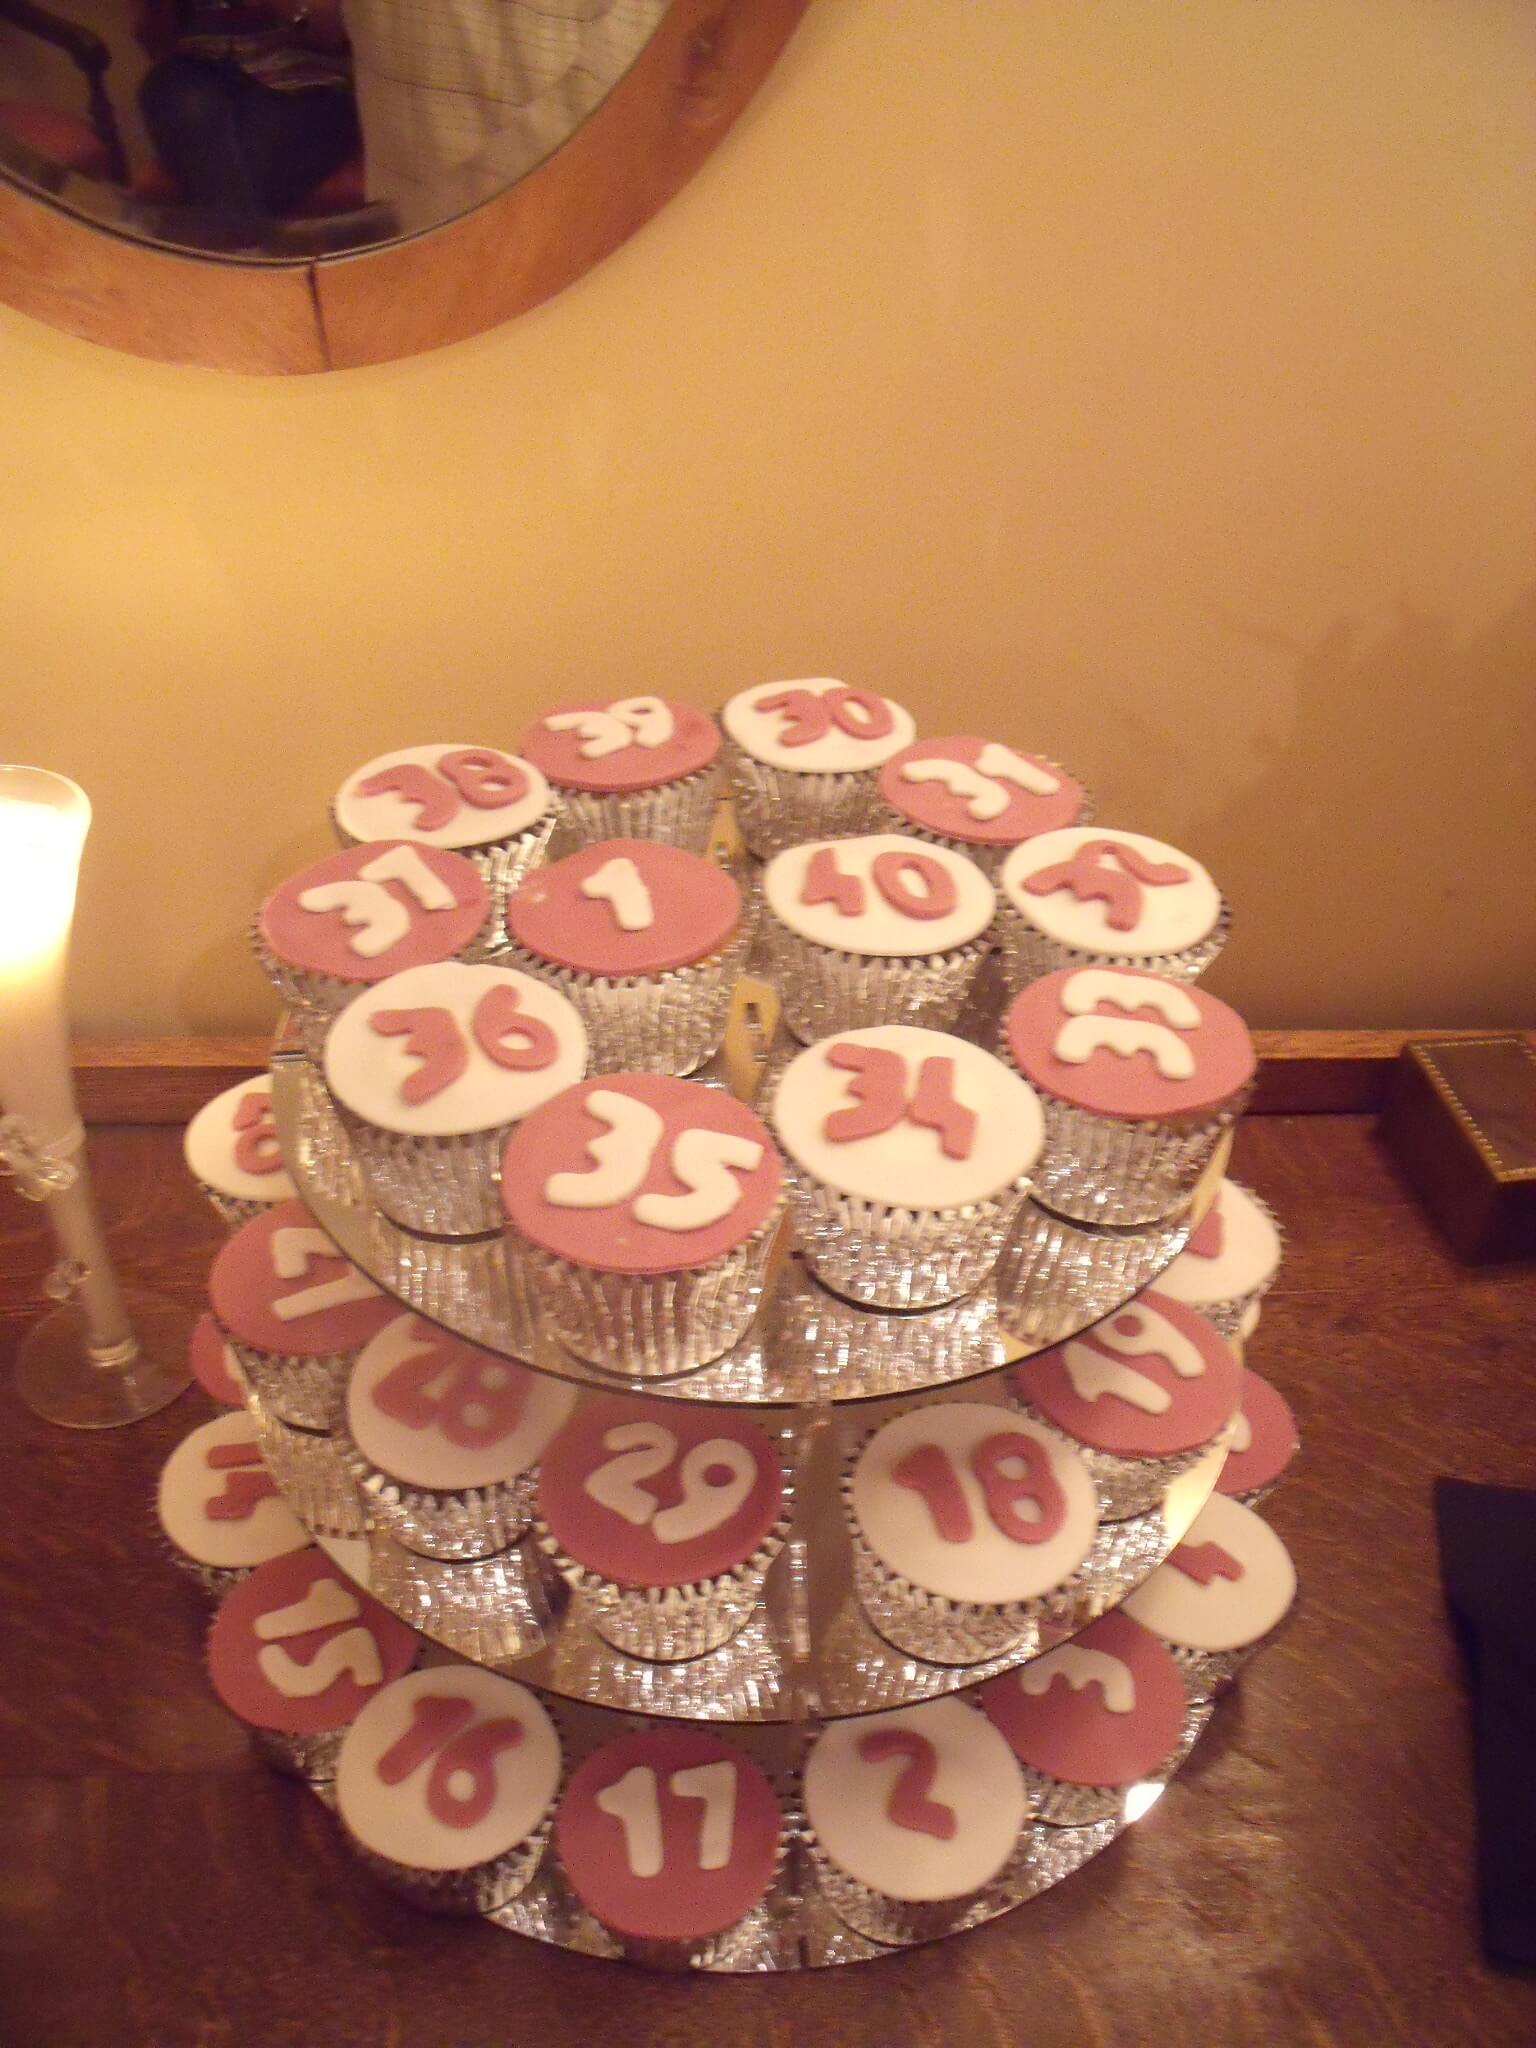 cupcakes with numbers